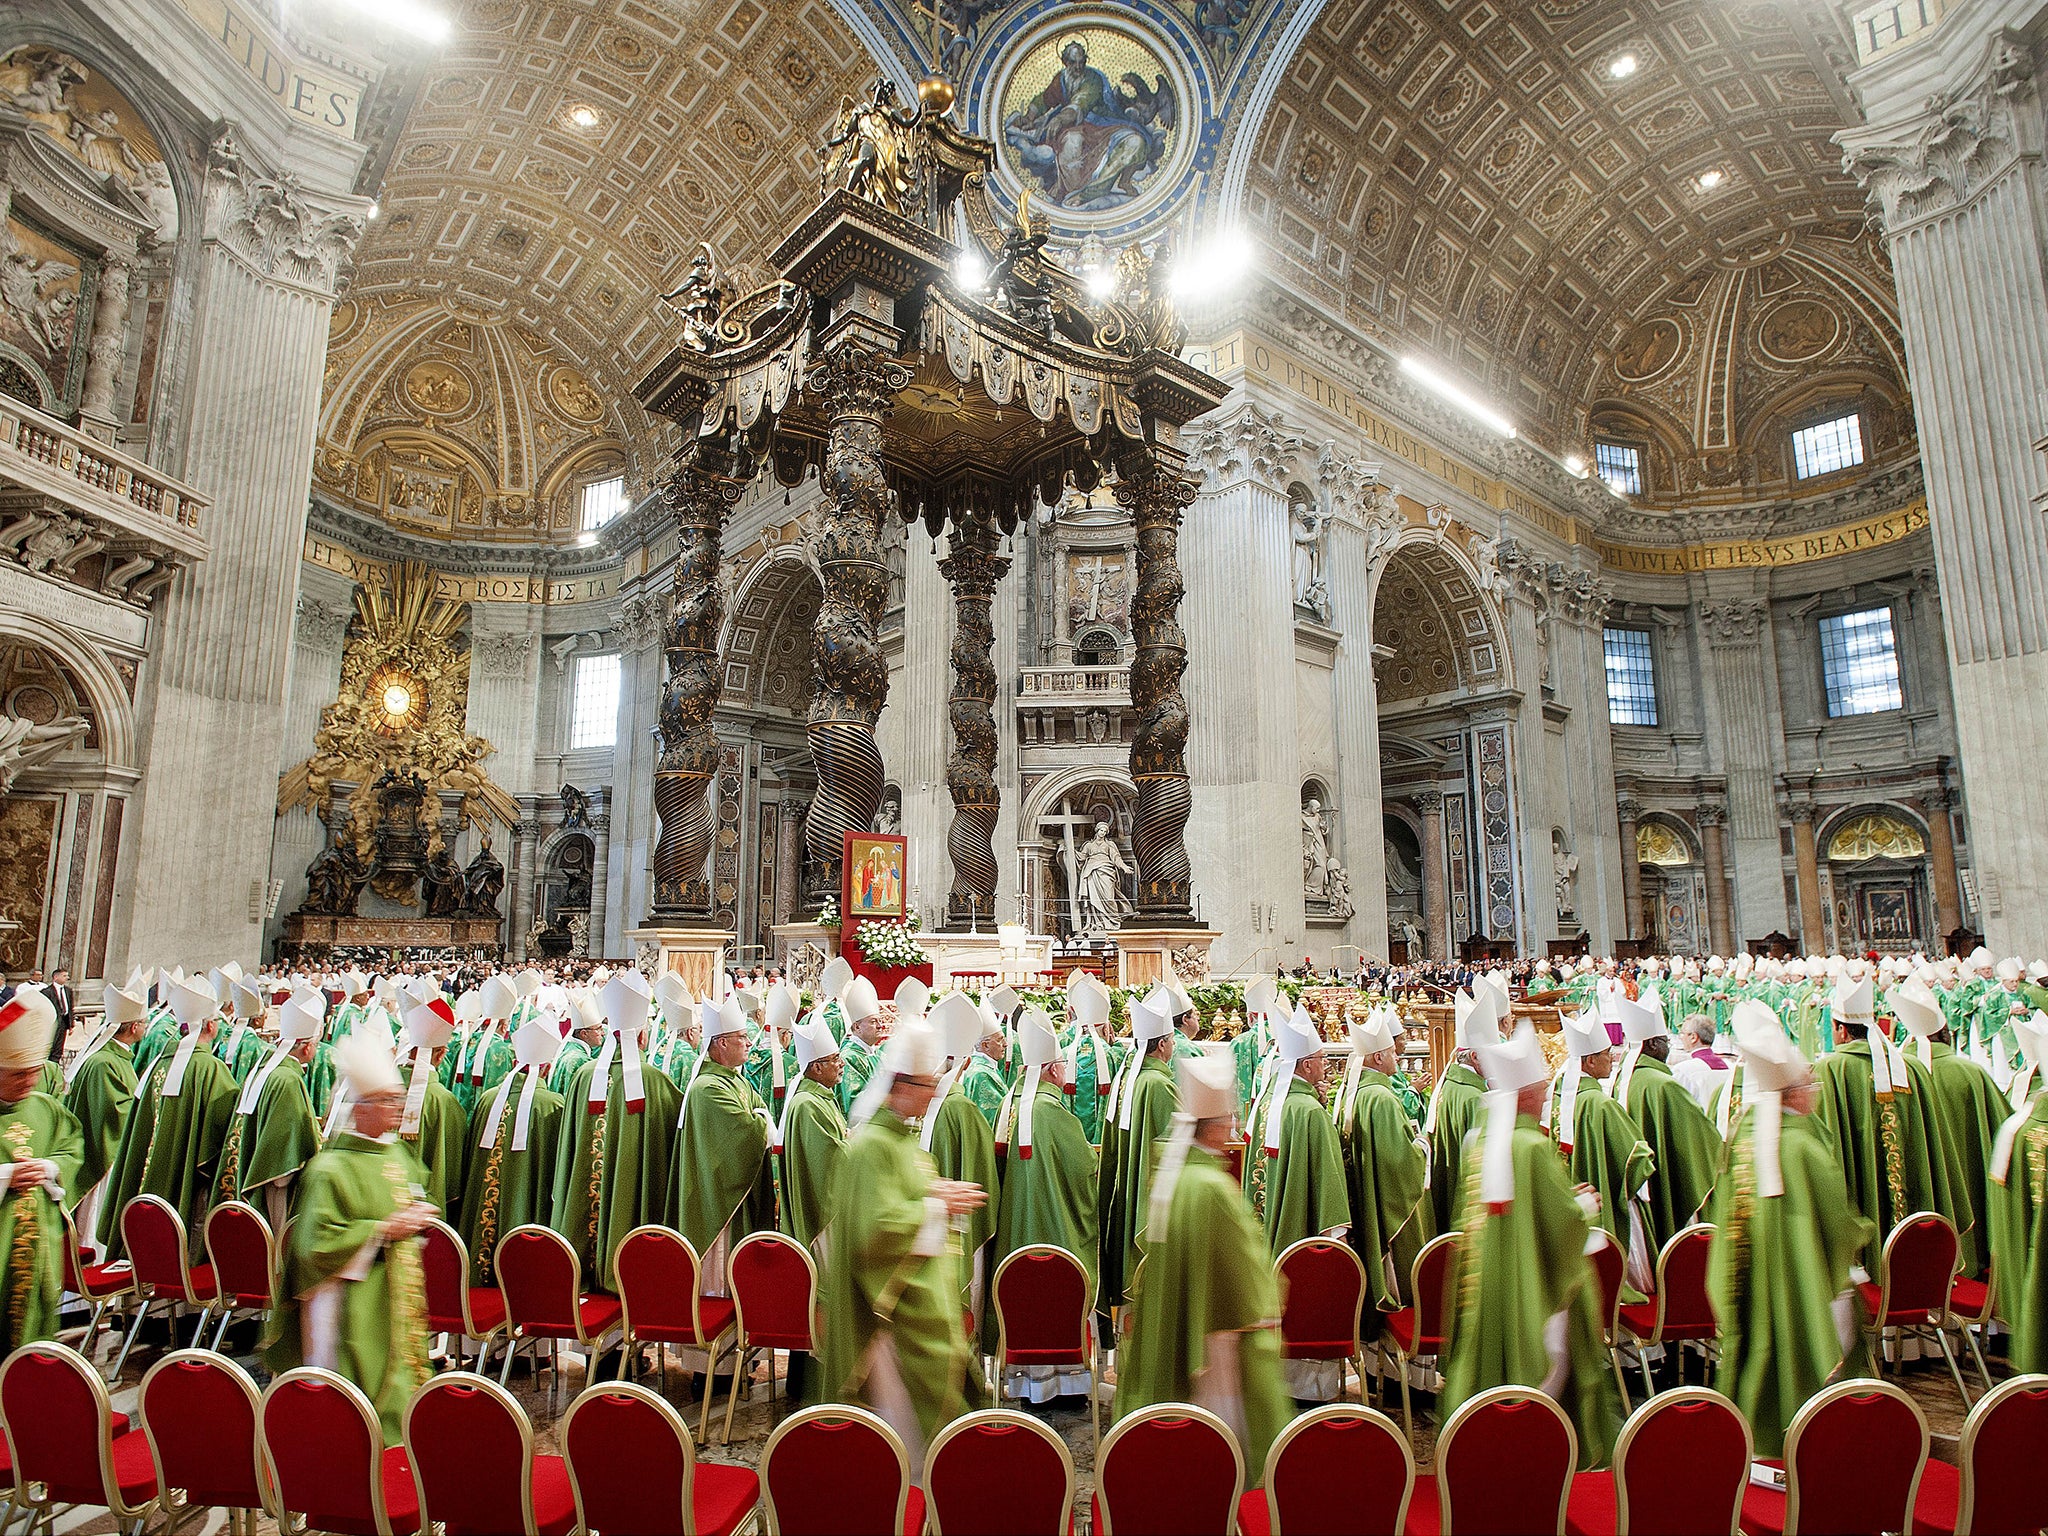 Opening mass for the Synod of the Bishops at St. Peter Basilica on 4th October. It has emerged that The Vatican has been sending gay priests to a monastery to be “cured” alongside paedophiles and drug addicts